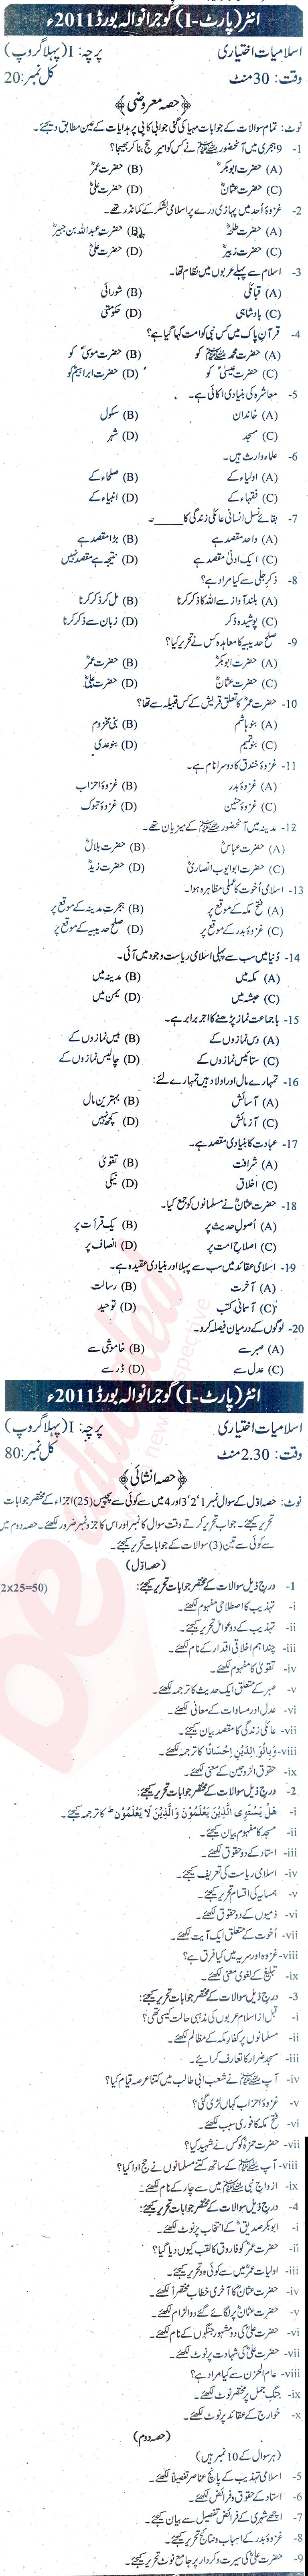 Islamiat Elective FA Part 1 Past Paper Group 1 BISE Gujranwala 2011